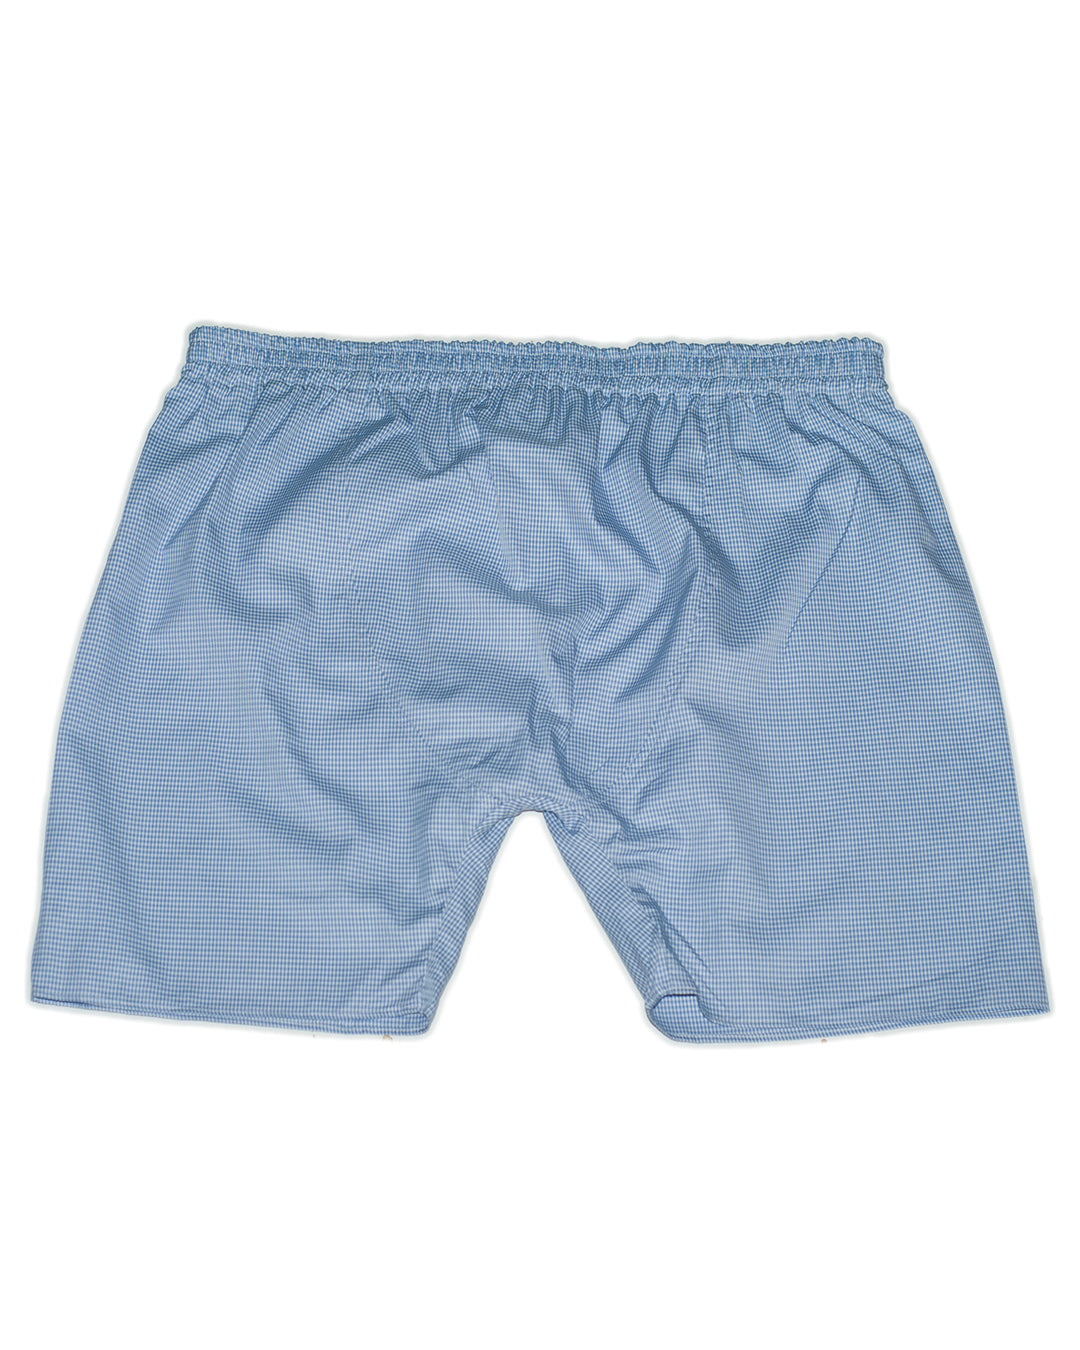 Luxire Boxer Shorts - 3 Pack